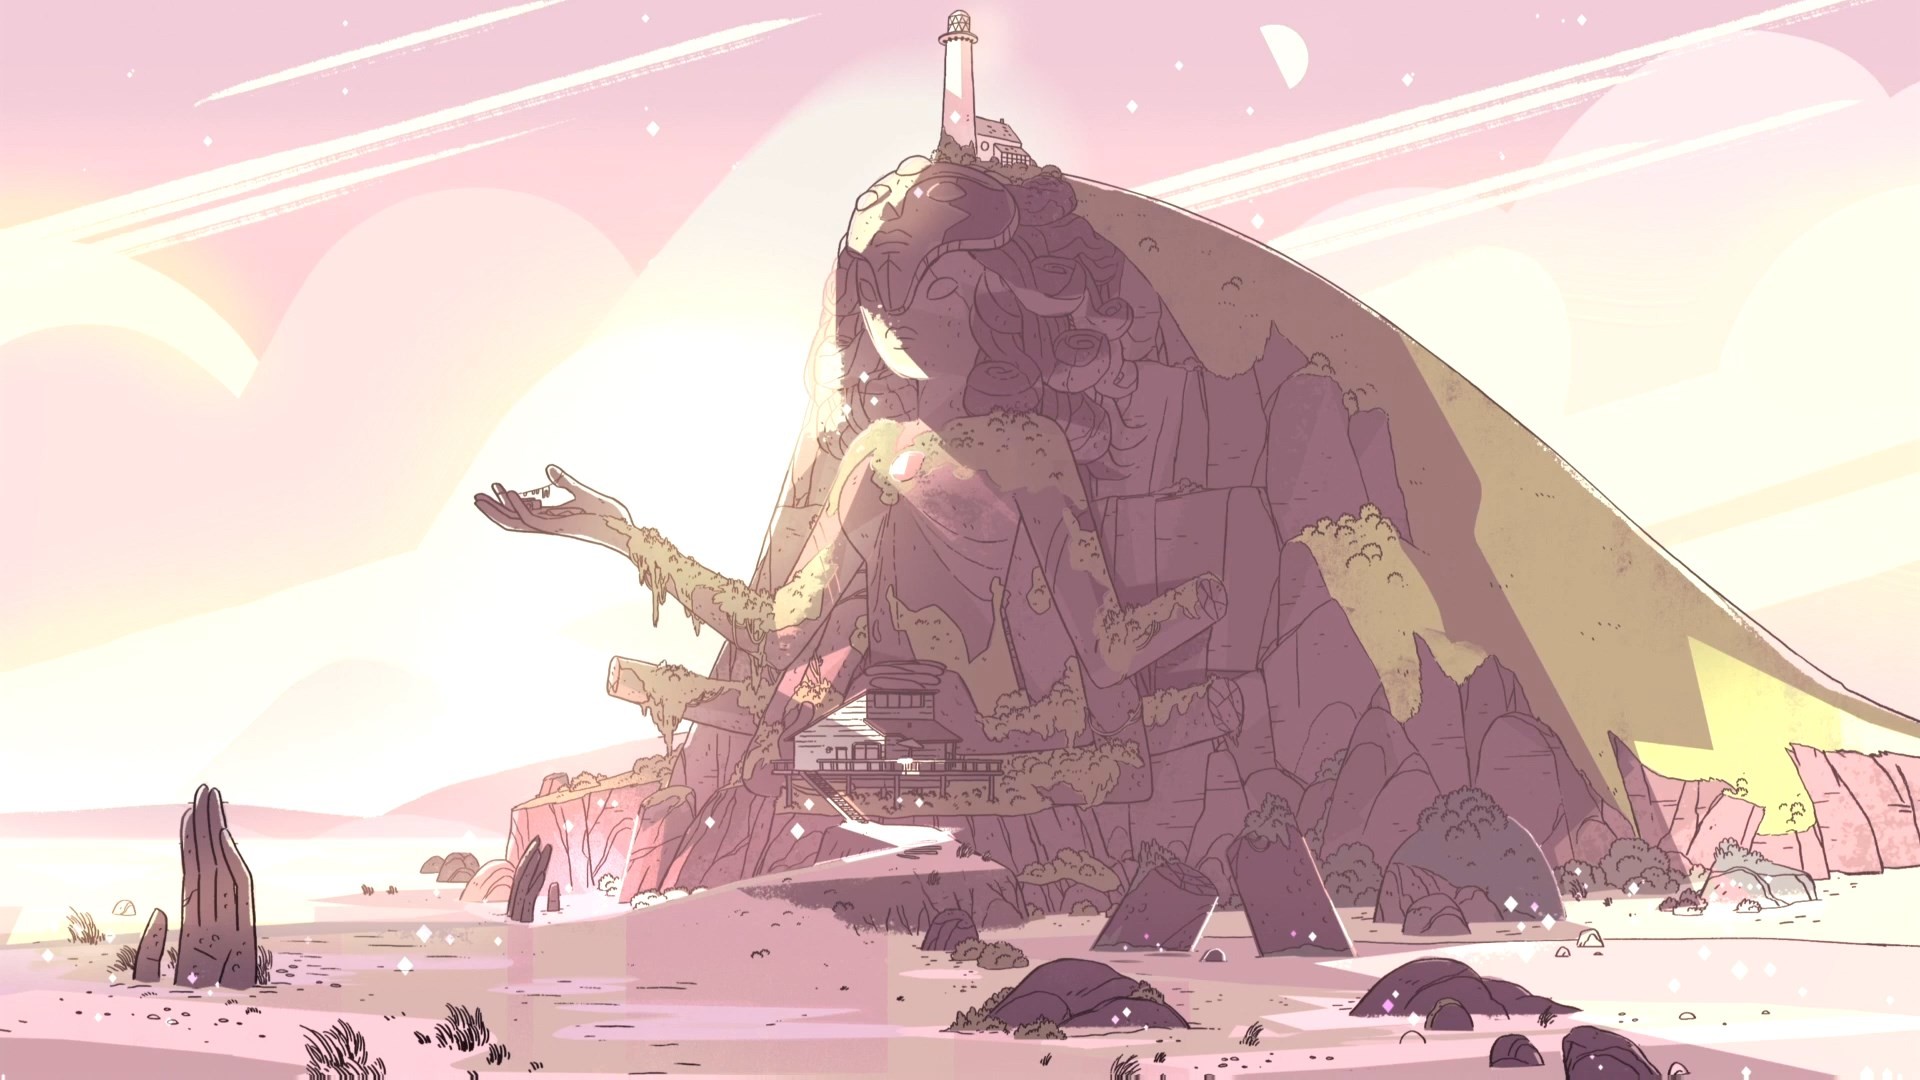 548149 1920x1080 HDQ Images steven universe JPG 183 kB  Rare Gallery HD  Wallpapers